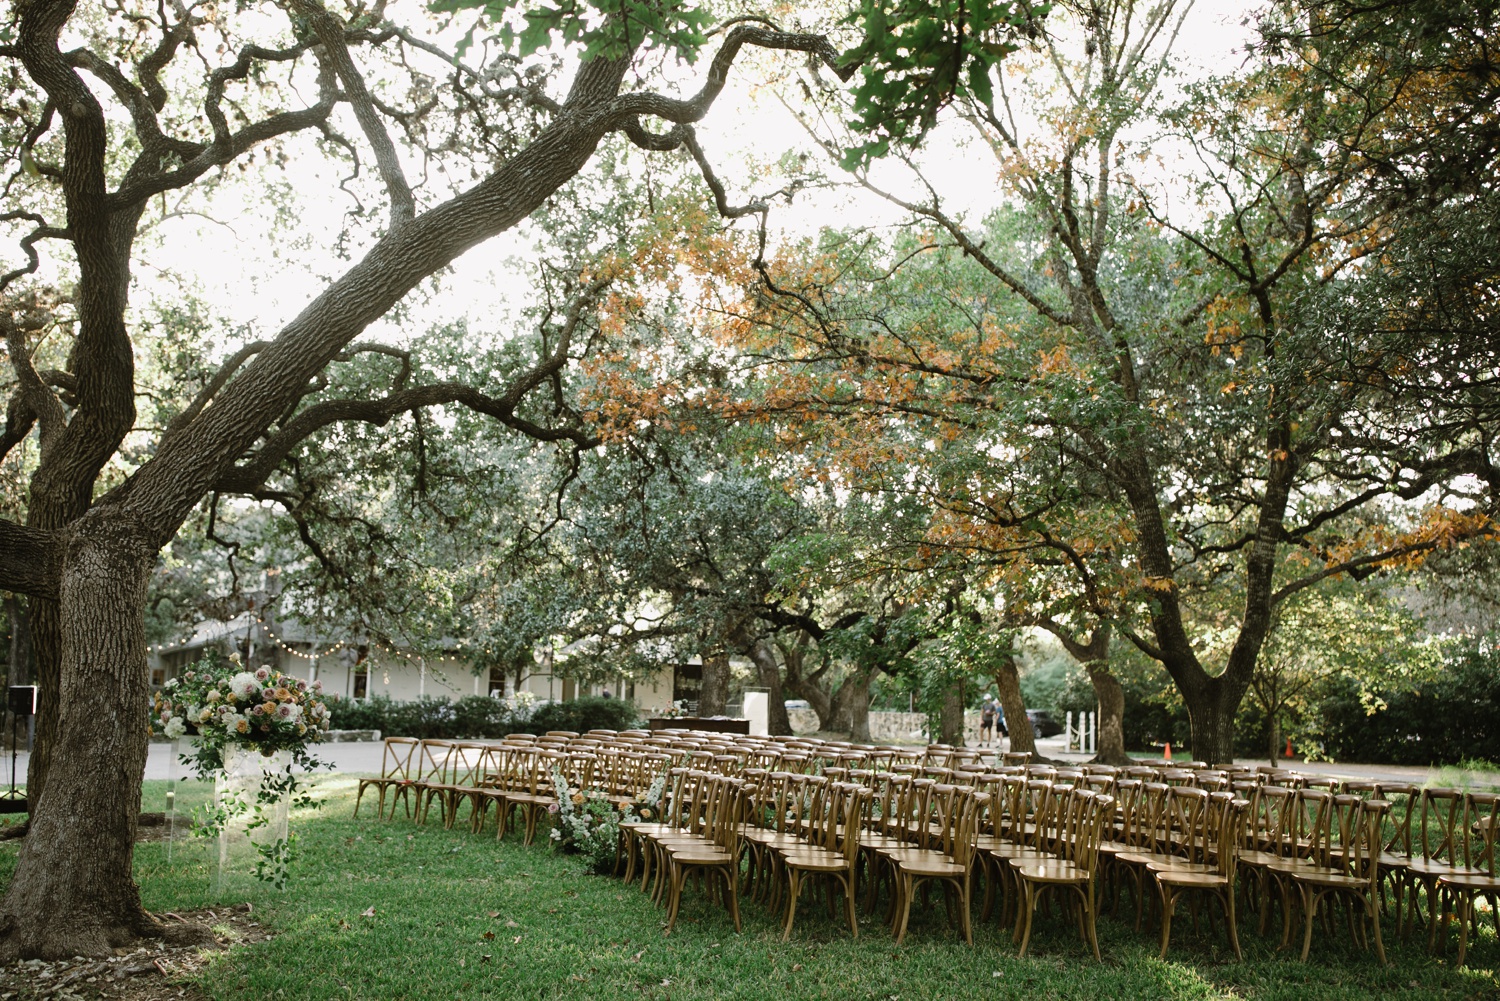 Outdoor wedding ceremony featuring wooden cafe chairs and floral installations underneath live oak trees